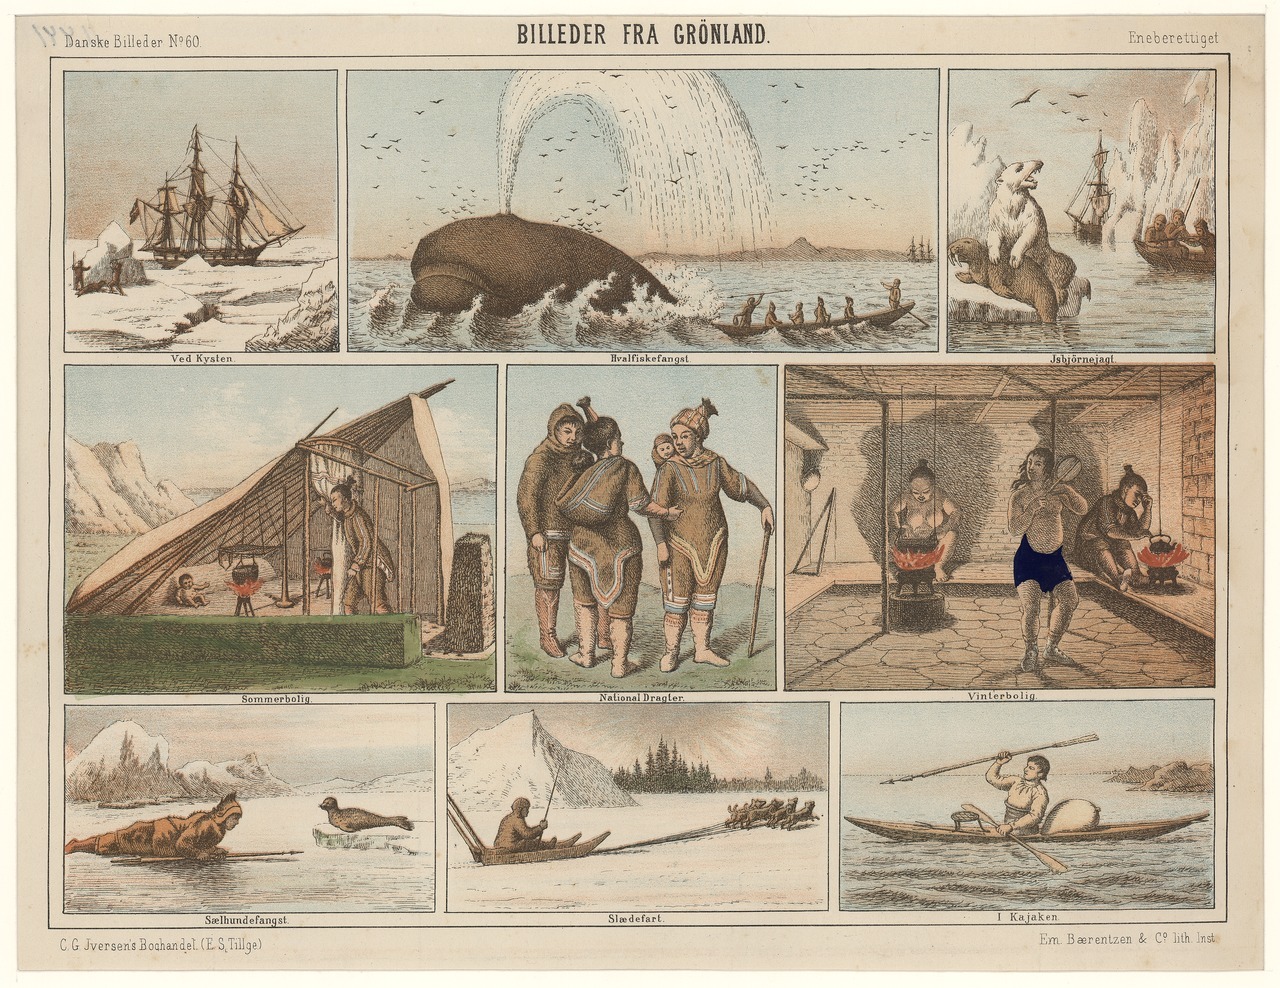 Pictures of Greenland, c. 1863